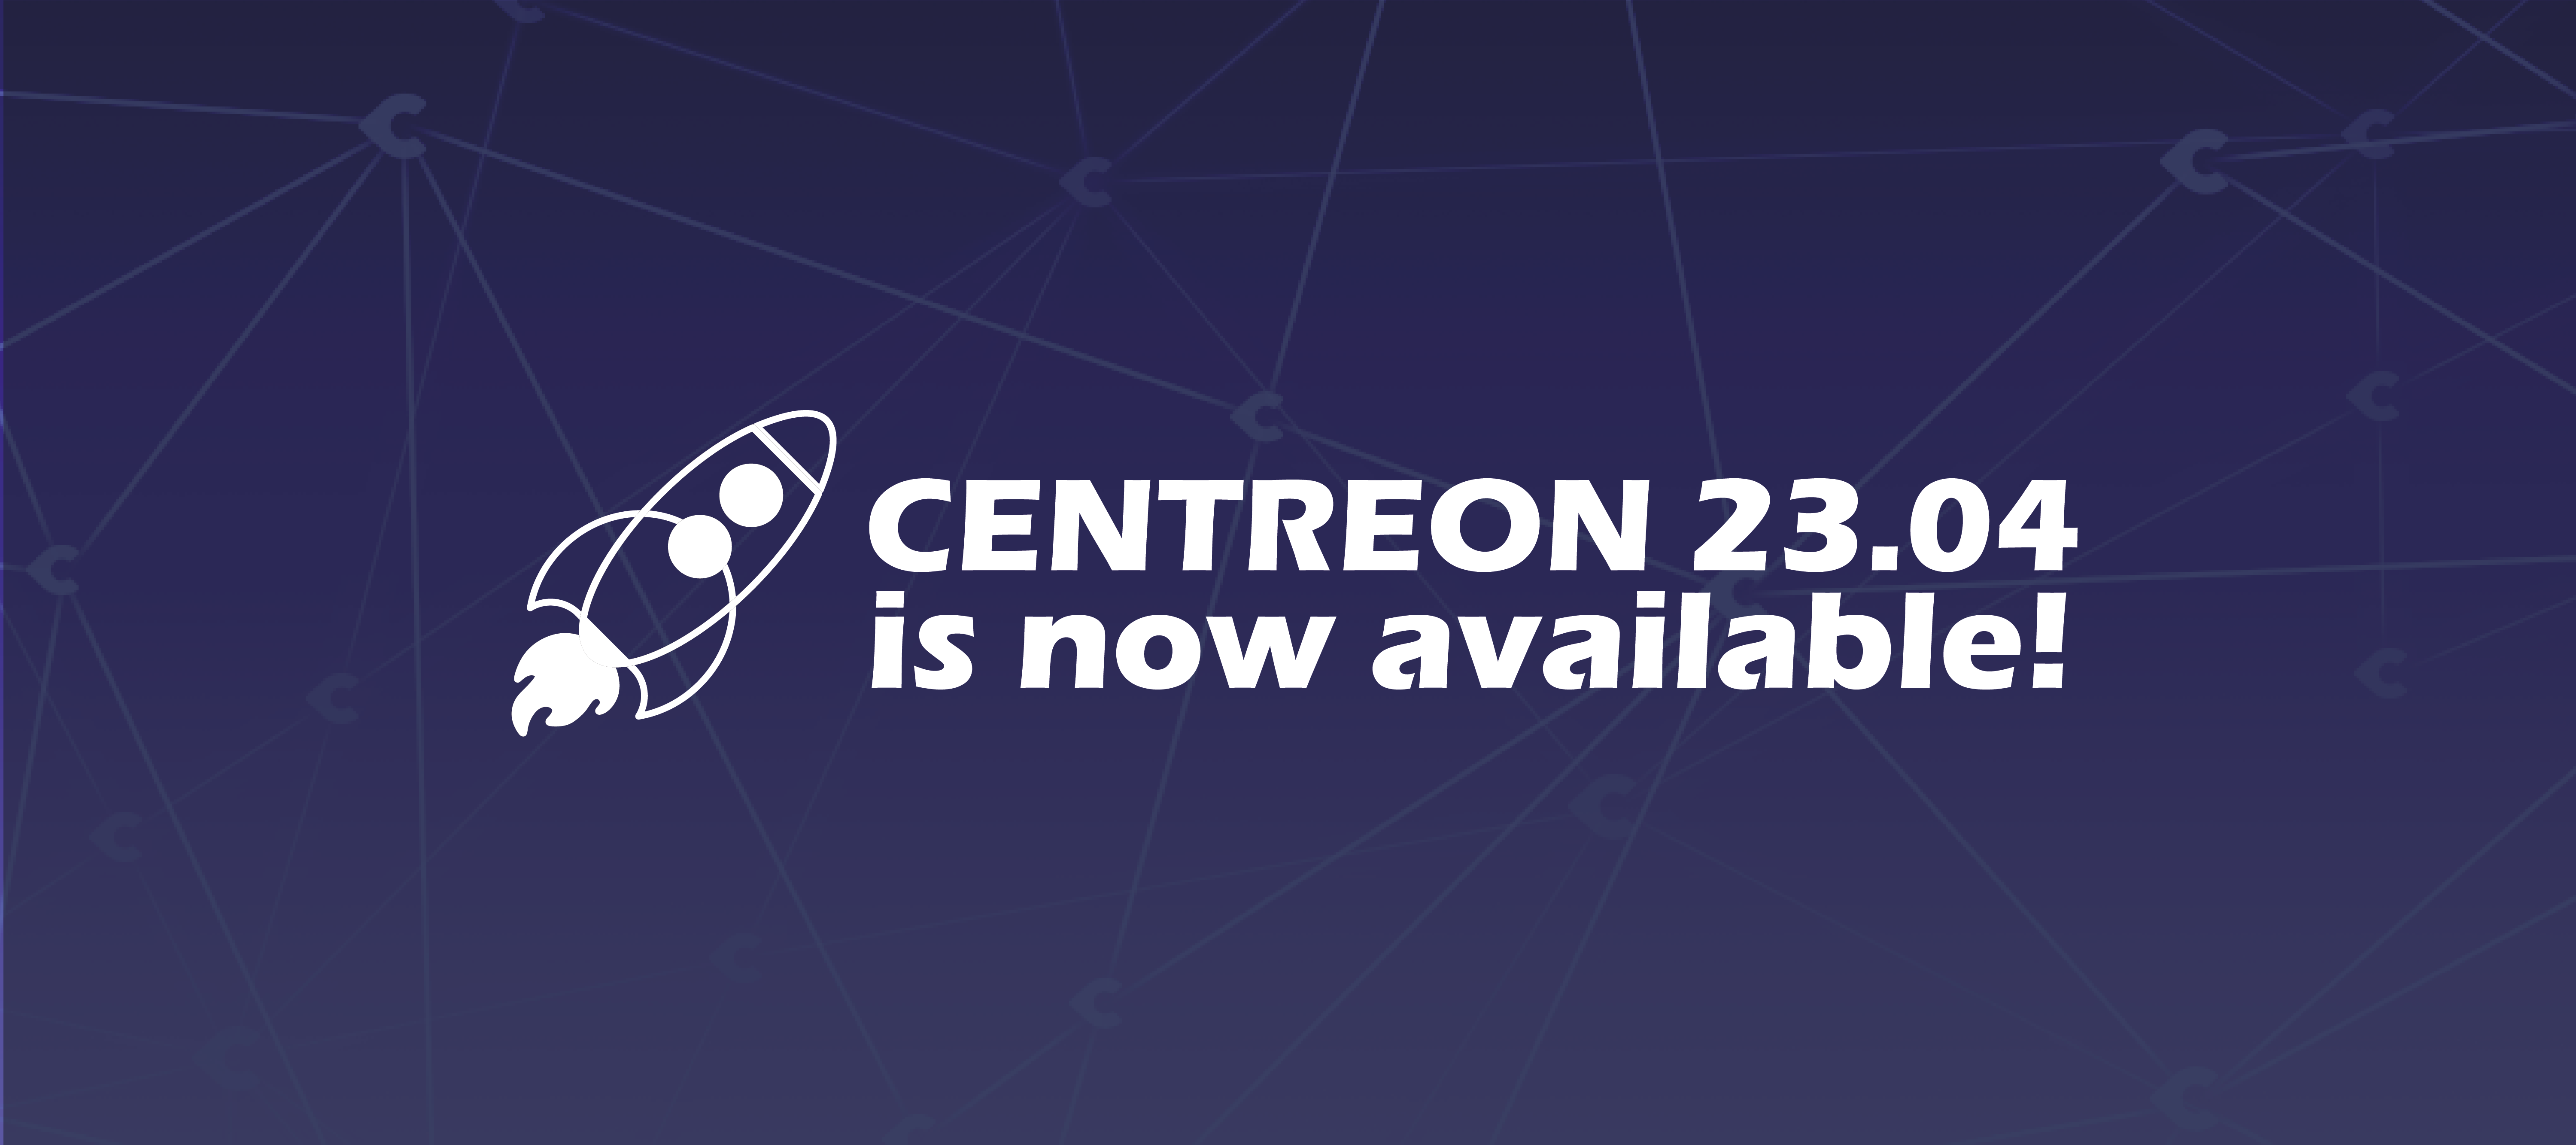 Centreon 23.04 is out now!